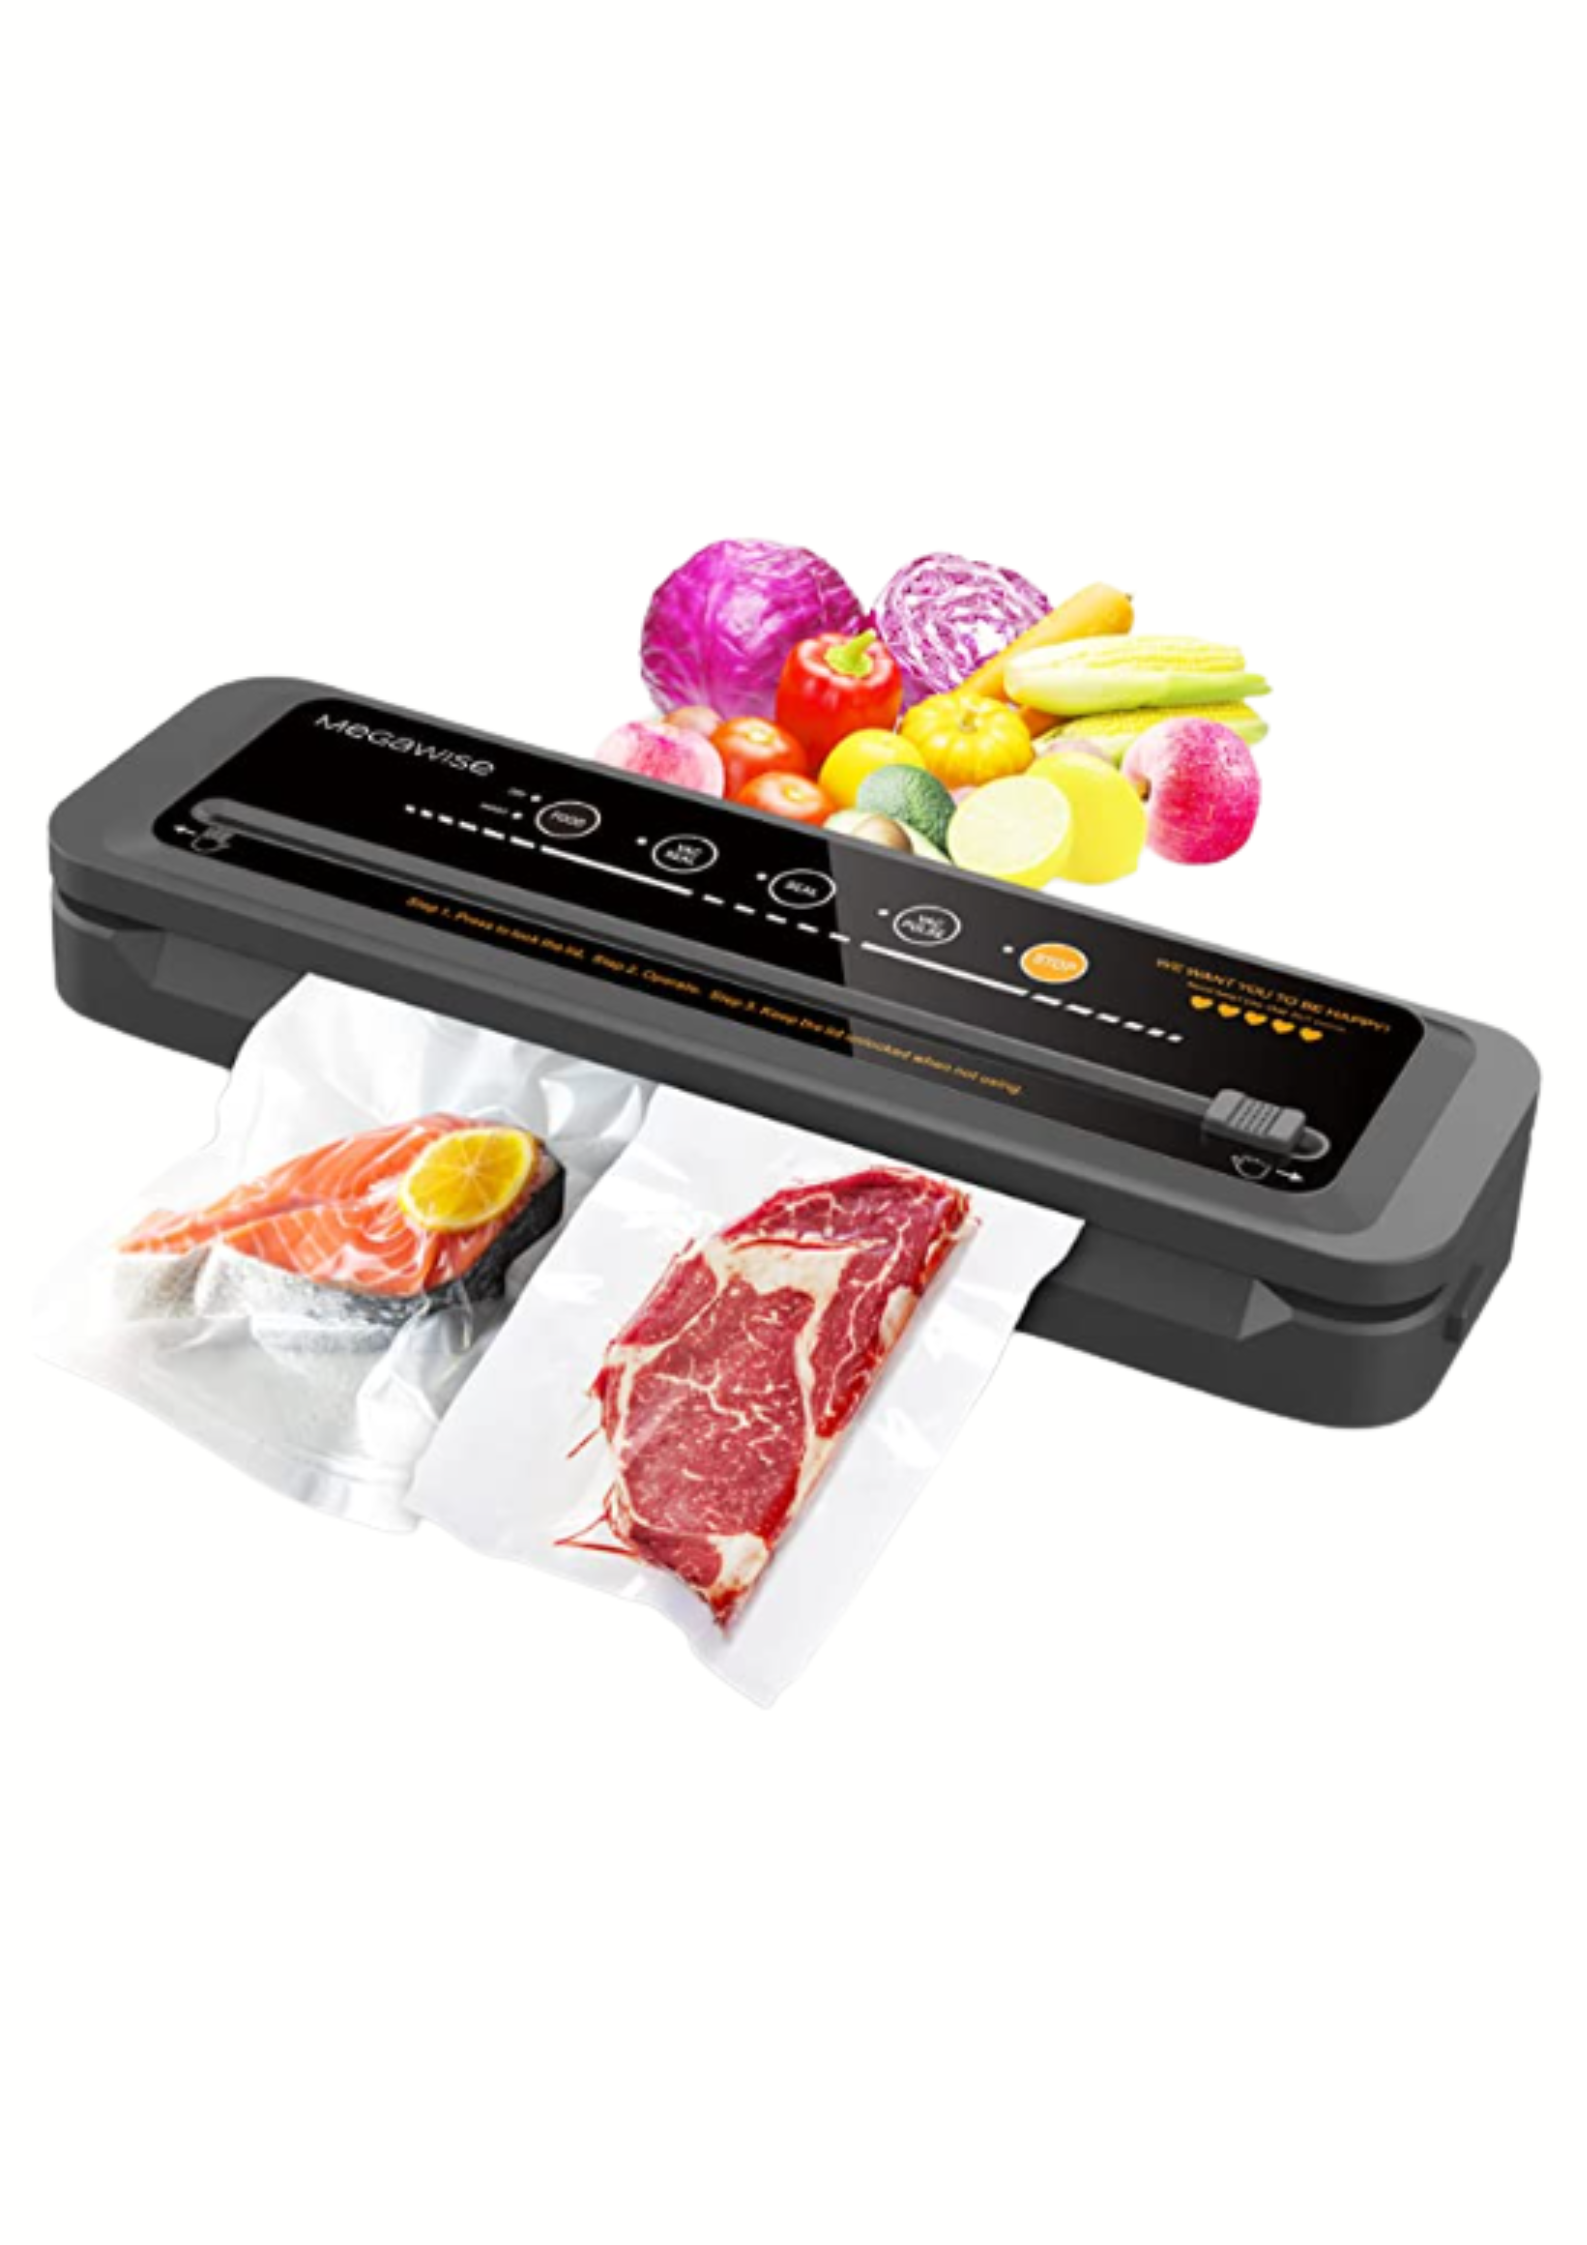 MegaWise Vacuum Sealer Machine, 80kPa Suction Power, Bags and Cutter  Included, Compact One-Touch Automatic Food Sealer with External Vacuum  System